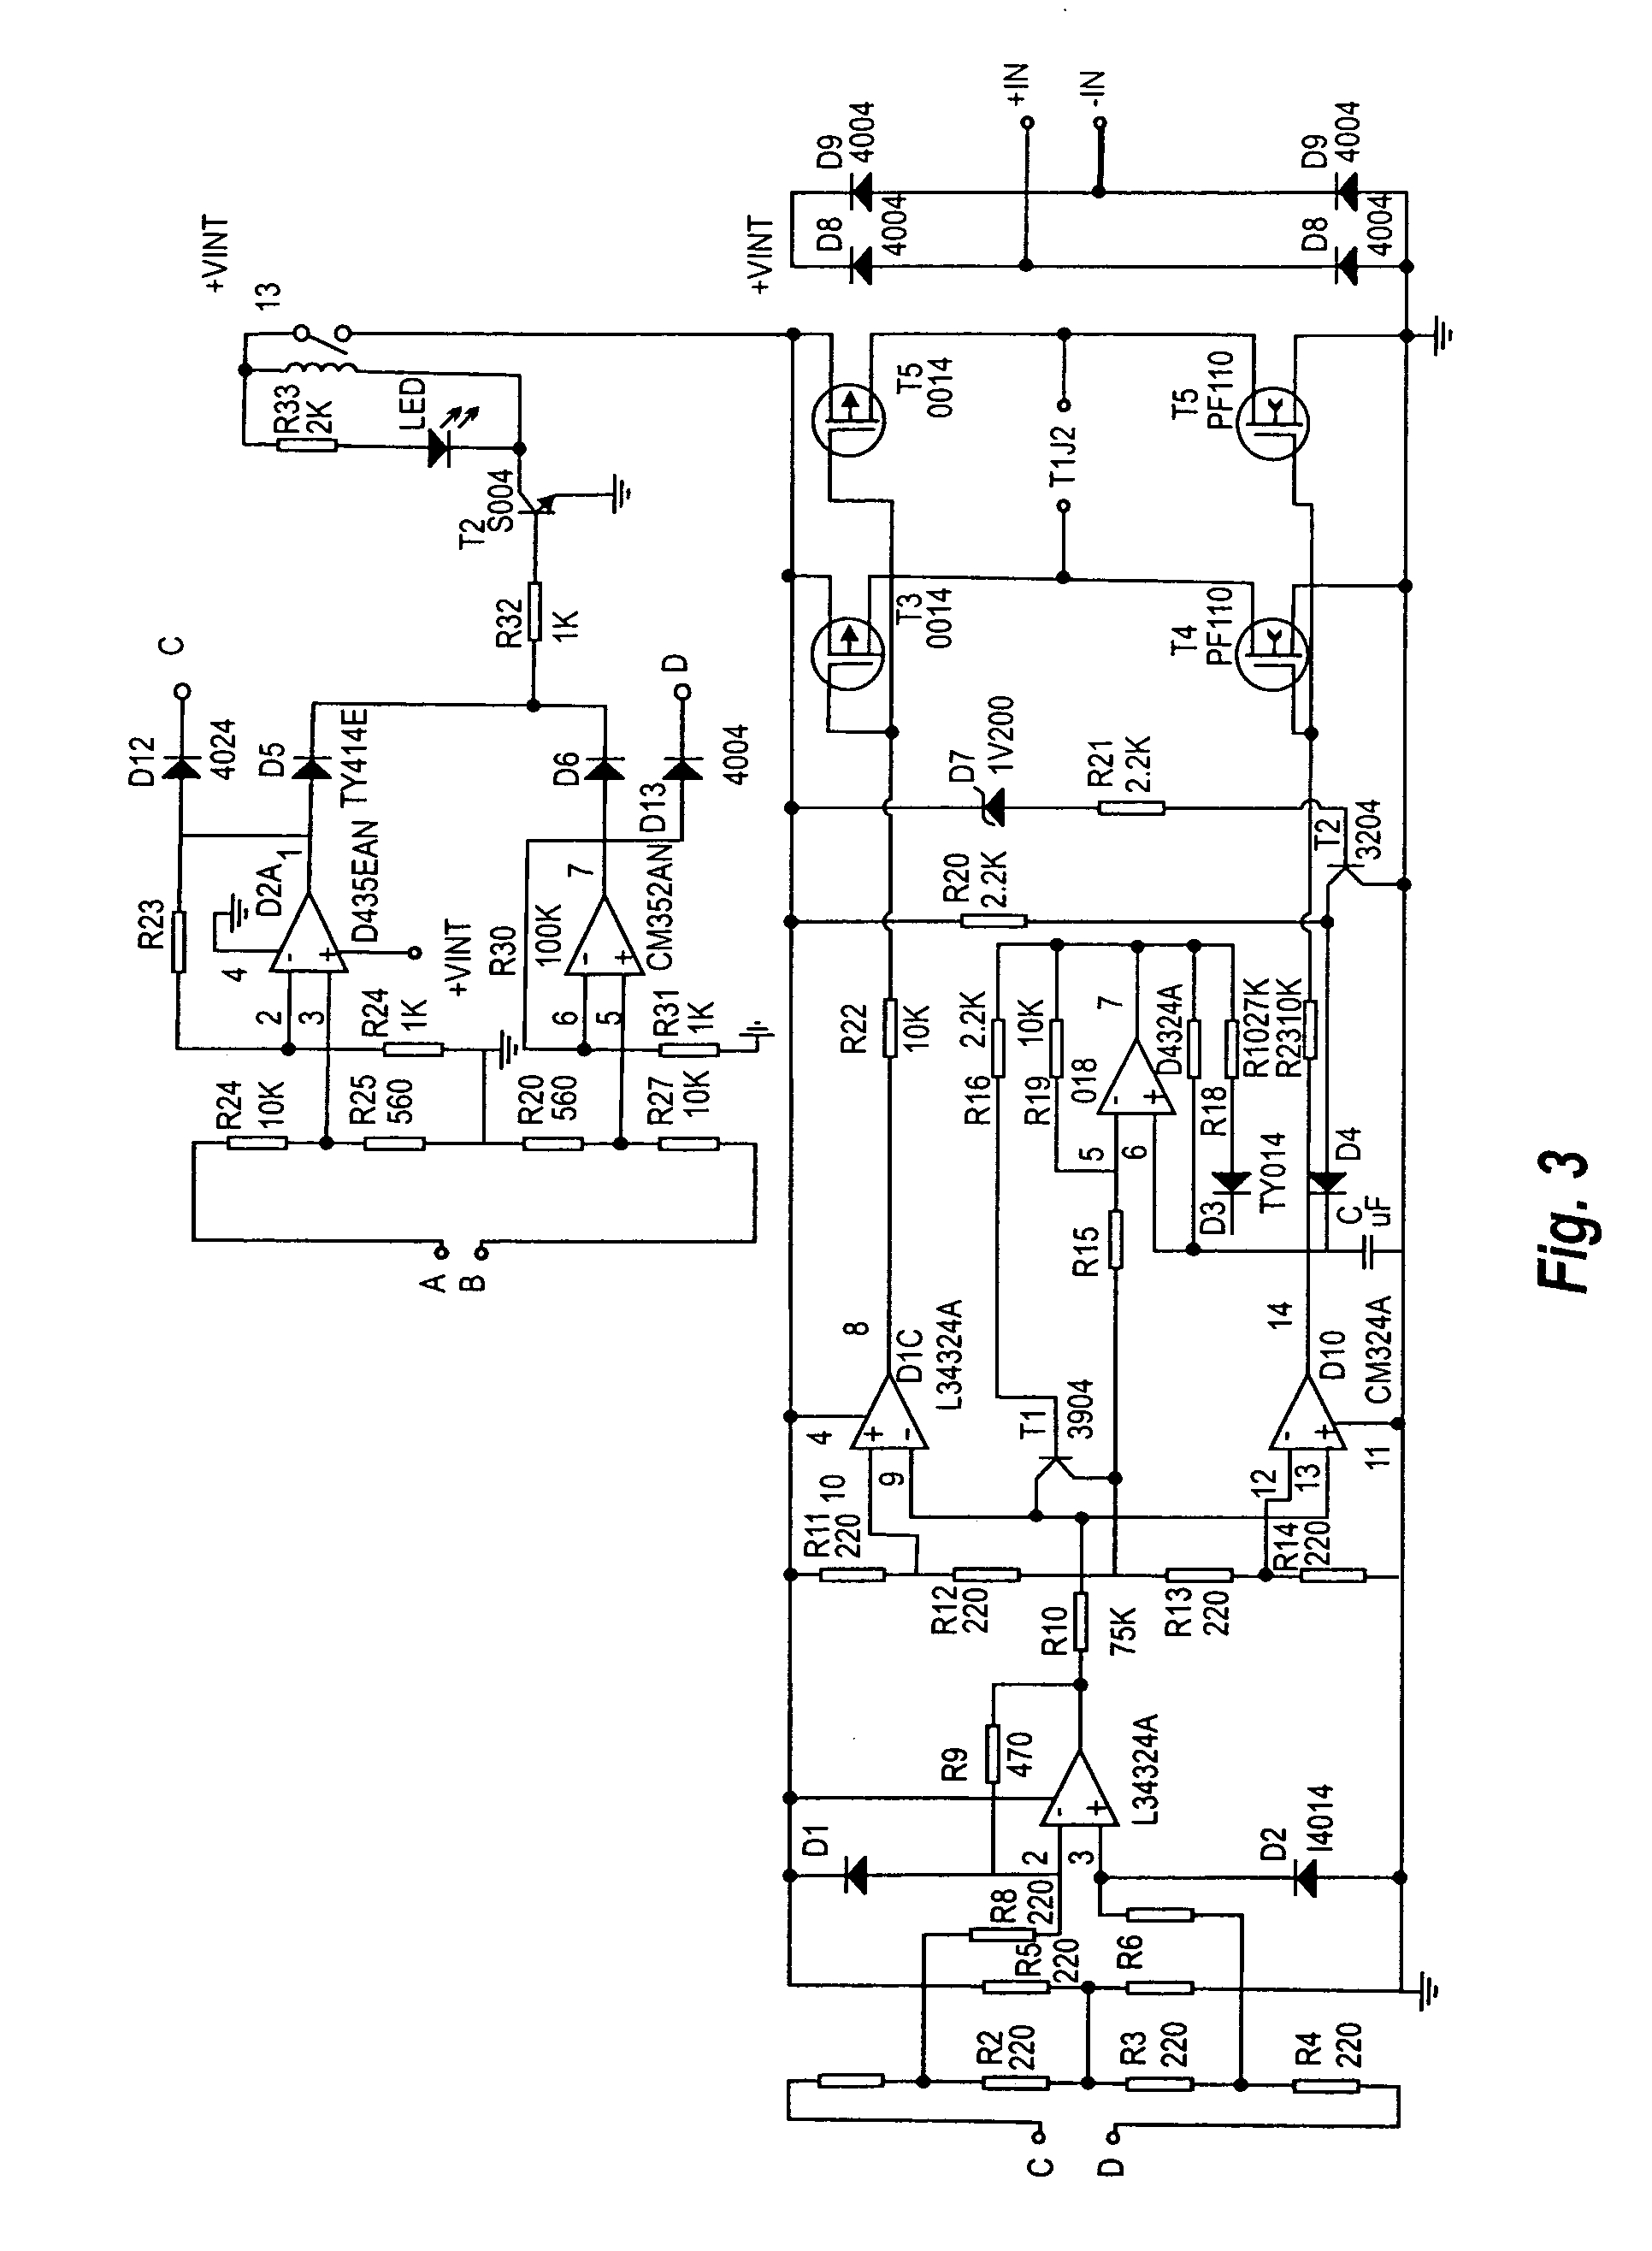 Automotive jump-starter with polarity detection, current routing circuitry and lighted cable connection pairs